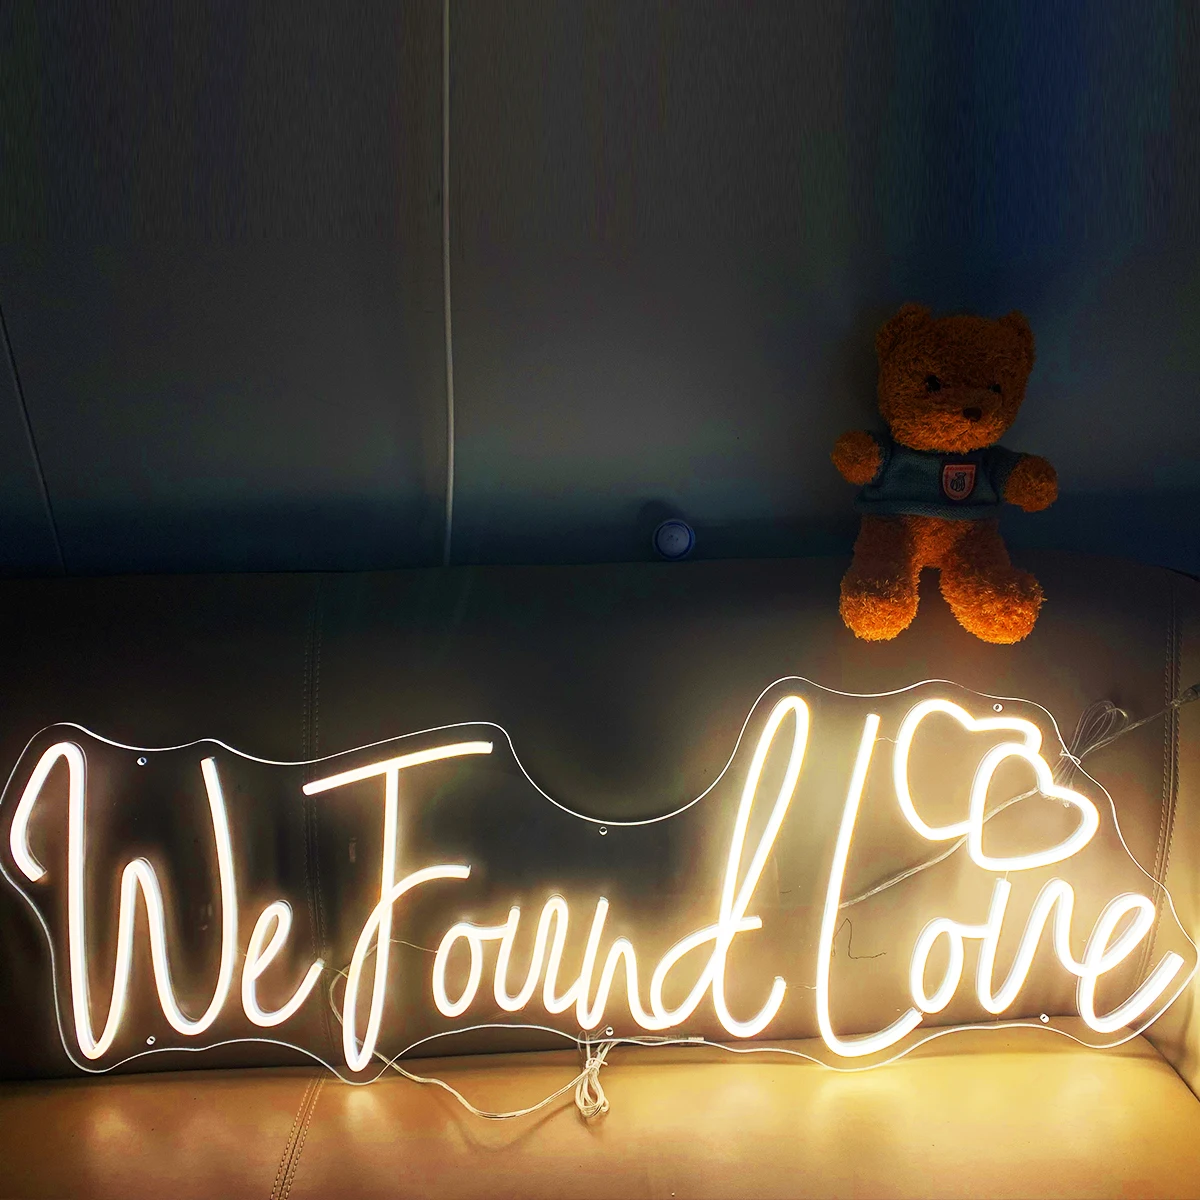 

We Found Love Neon sign, cold white, warm white, can be adjusted at will, birthday party decoration neon